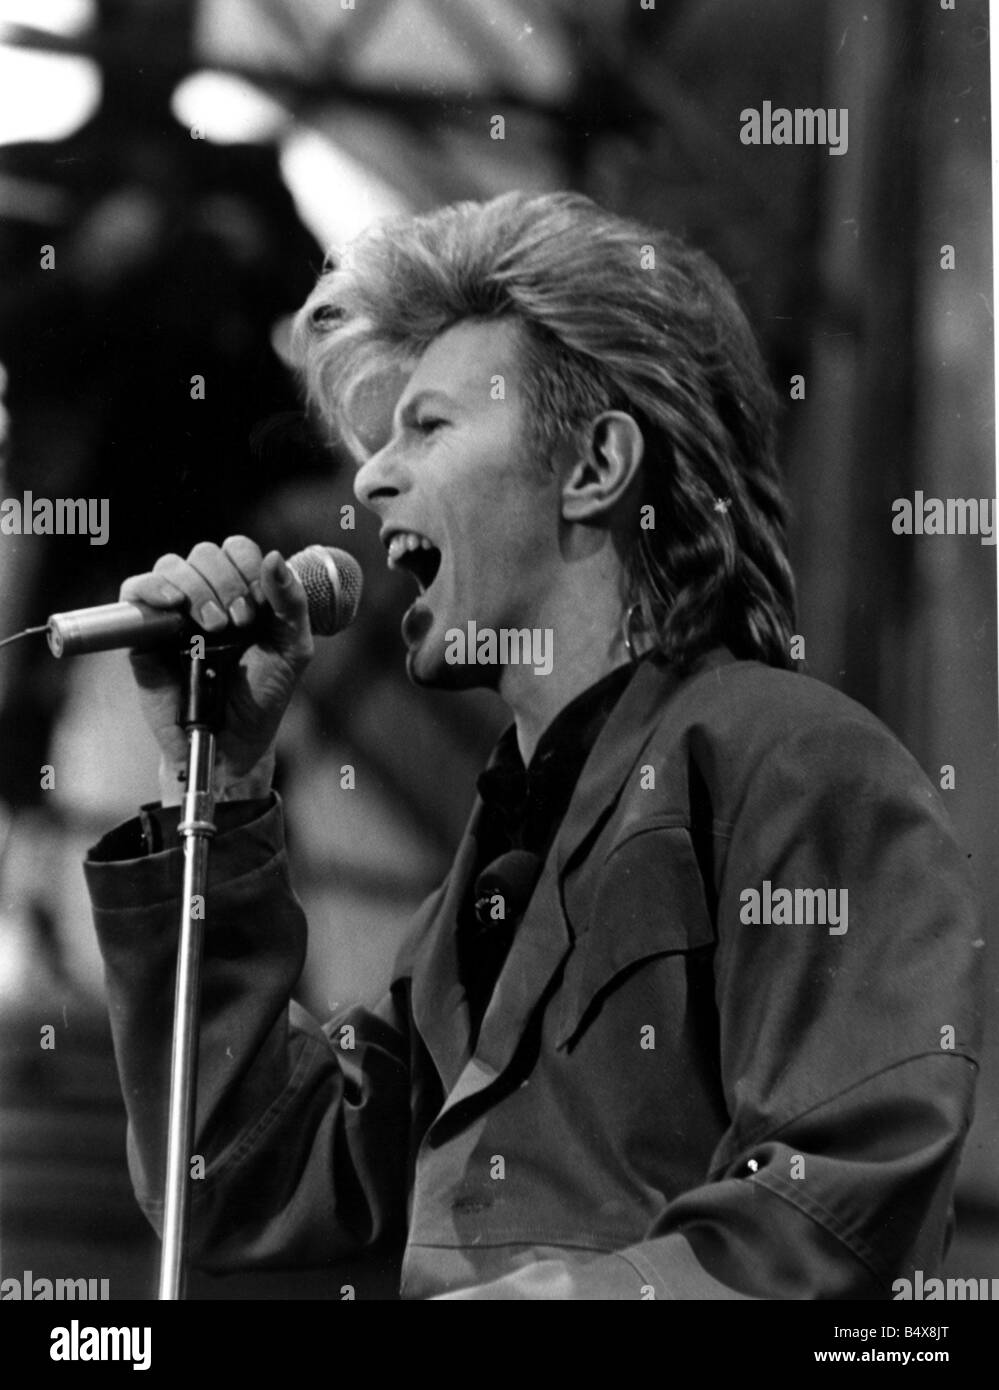 Pop Music David Bowie pictured in concert at Cardiff Arms Park during his  Glass Spider Tour 21st June 1987 Western Mail and Echo Copyright Image  Stock Photo - Alamy